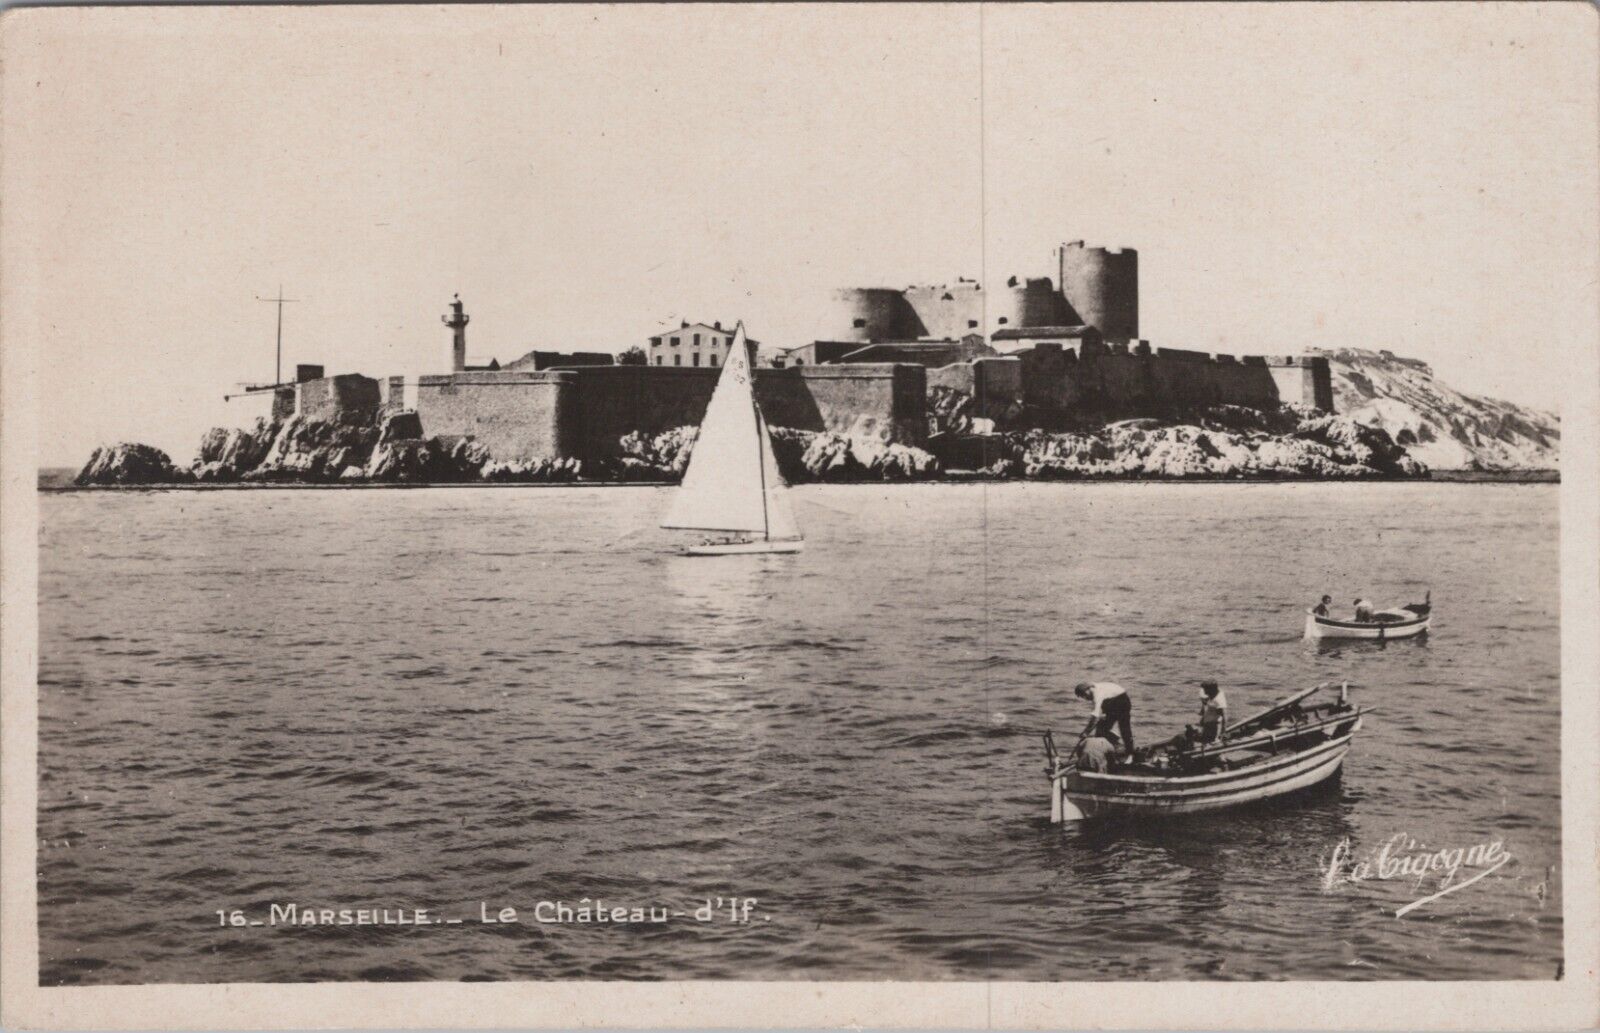 c1940s RPPC Marseille France Le Chateau-d'If & Boats Real Photo Postcard 5249.9